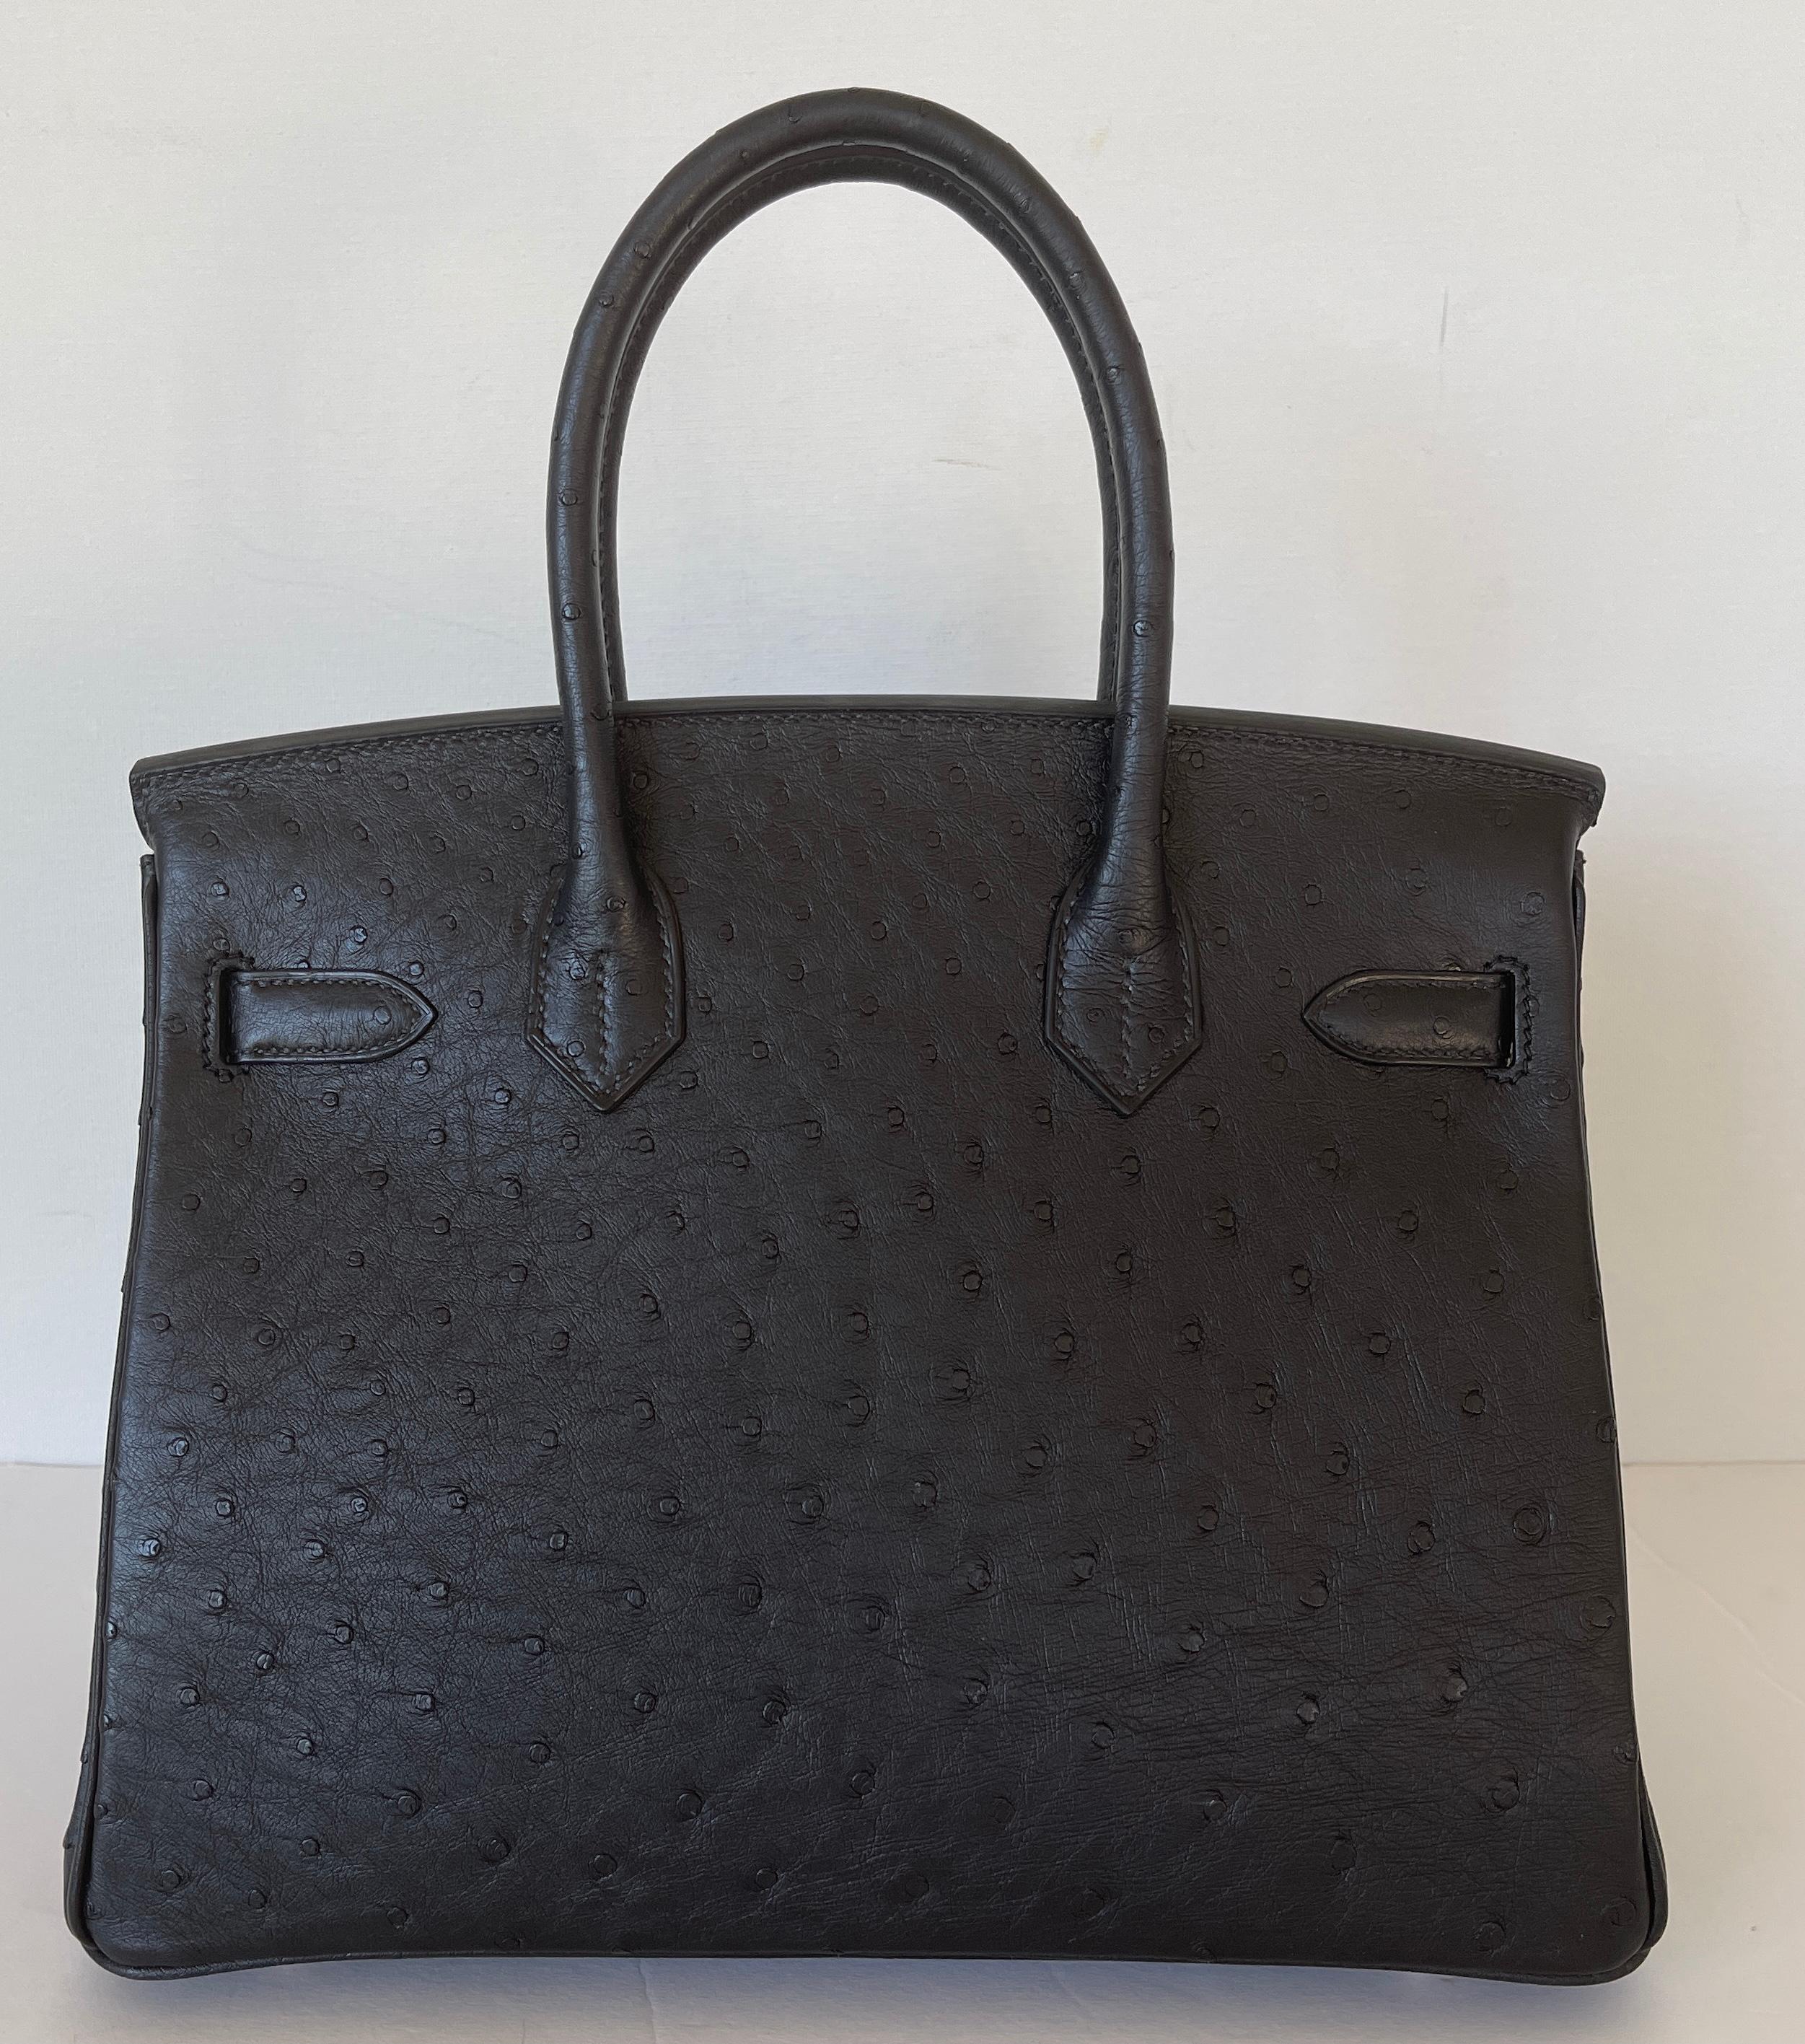 HERMÈS
30 Cm Birkin
Black Ostrich, very rare to find.  Hermes does not produce a lot of black ostrich
Tonal Stitching
Rose Gold Hardware
Black Chevre Lining
Absolutely Gorgeous bag to add to any collection
You cant go wrong with ostrich, its one of